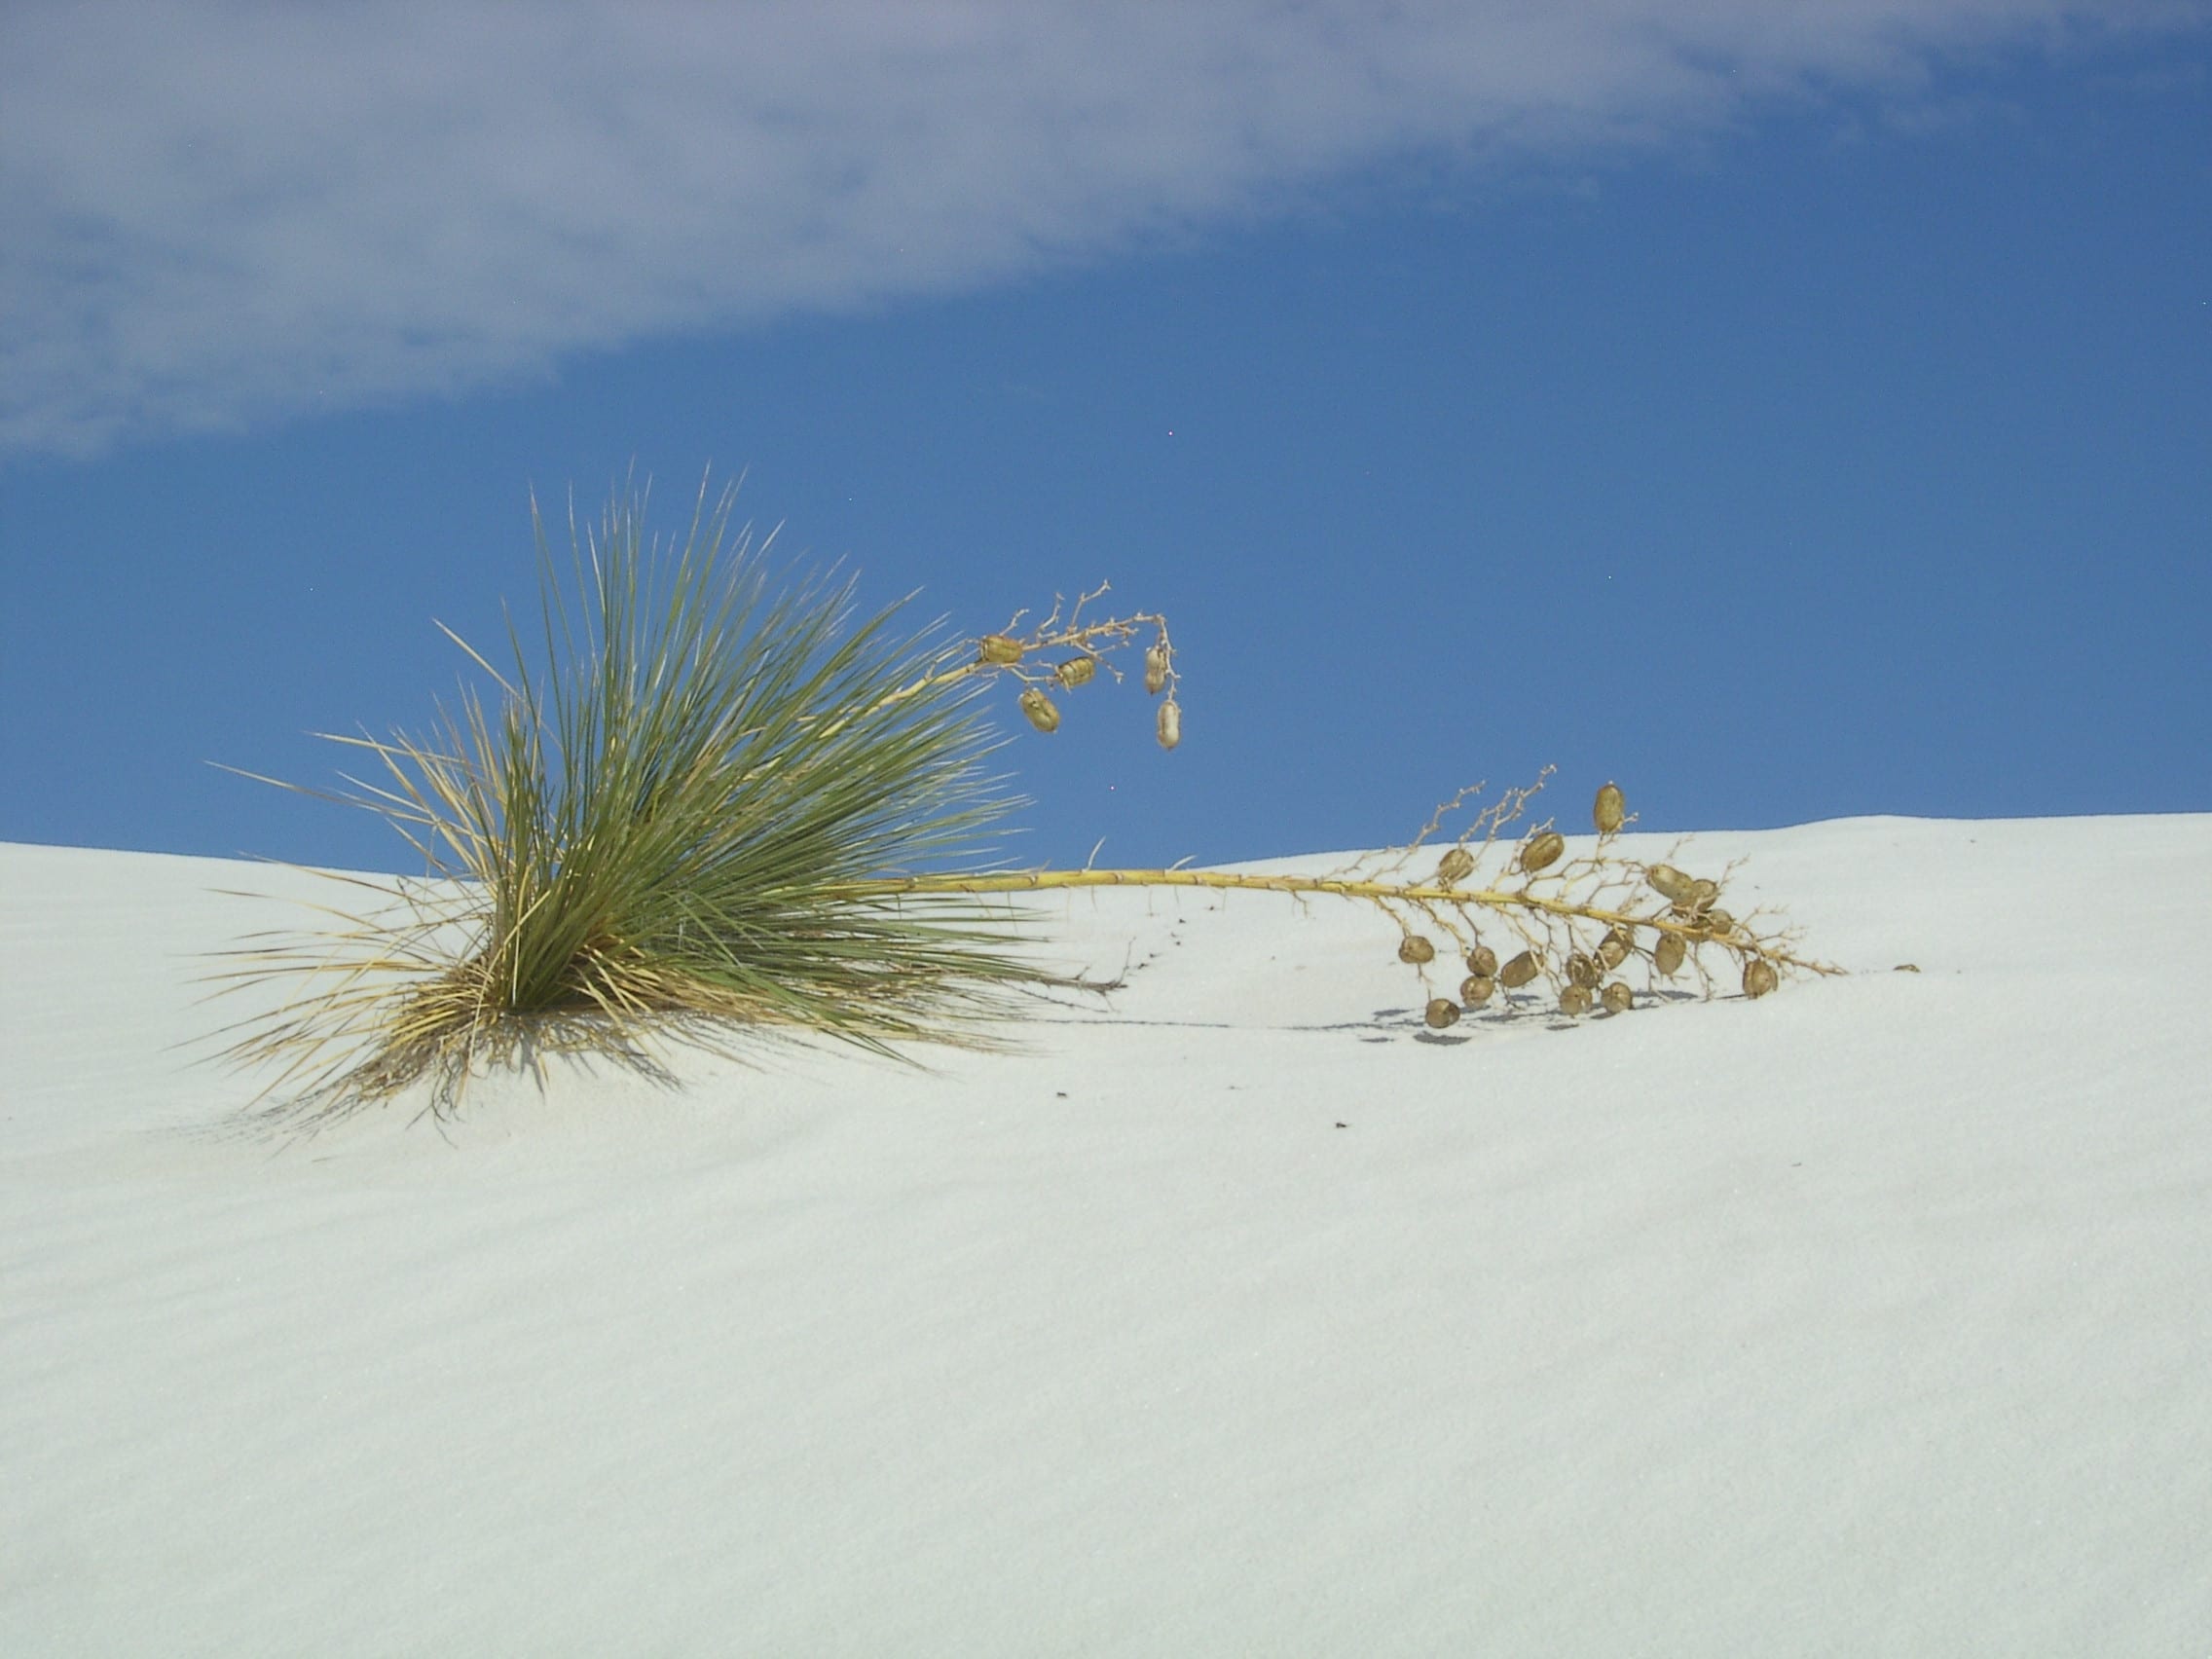 The White Sands National Monument...Just a few miles to the west, but you can see the dunes from the place...